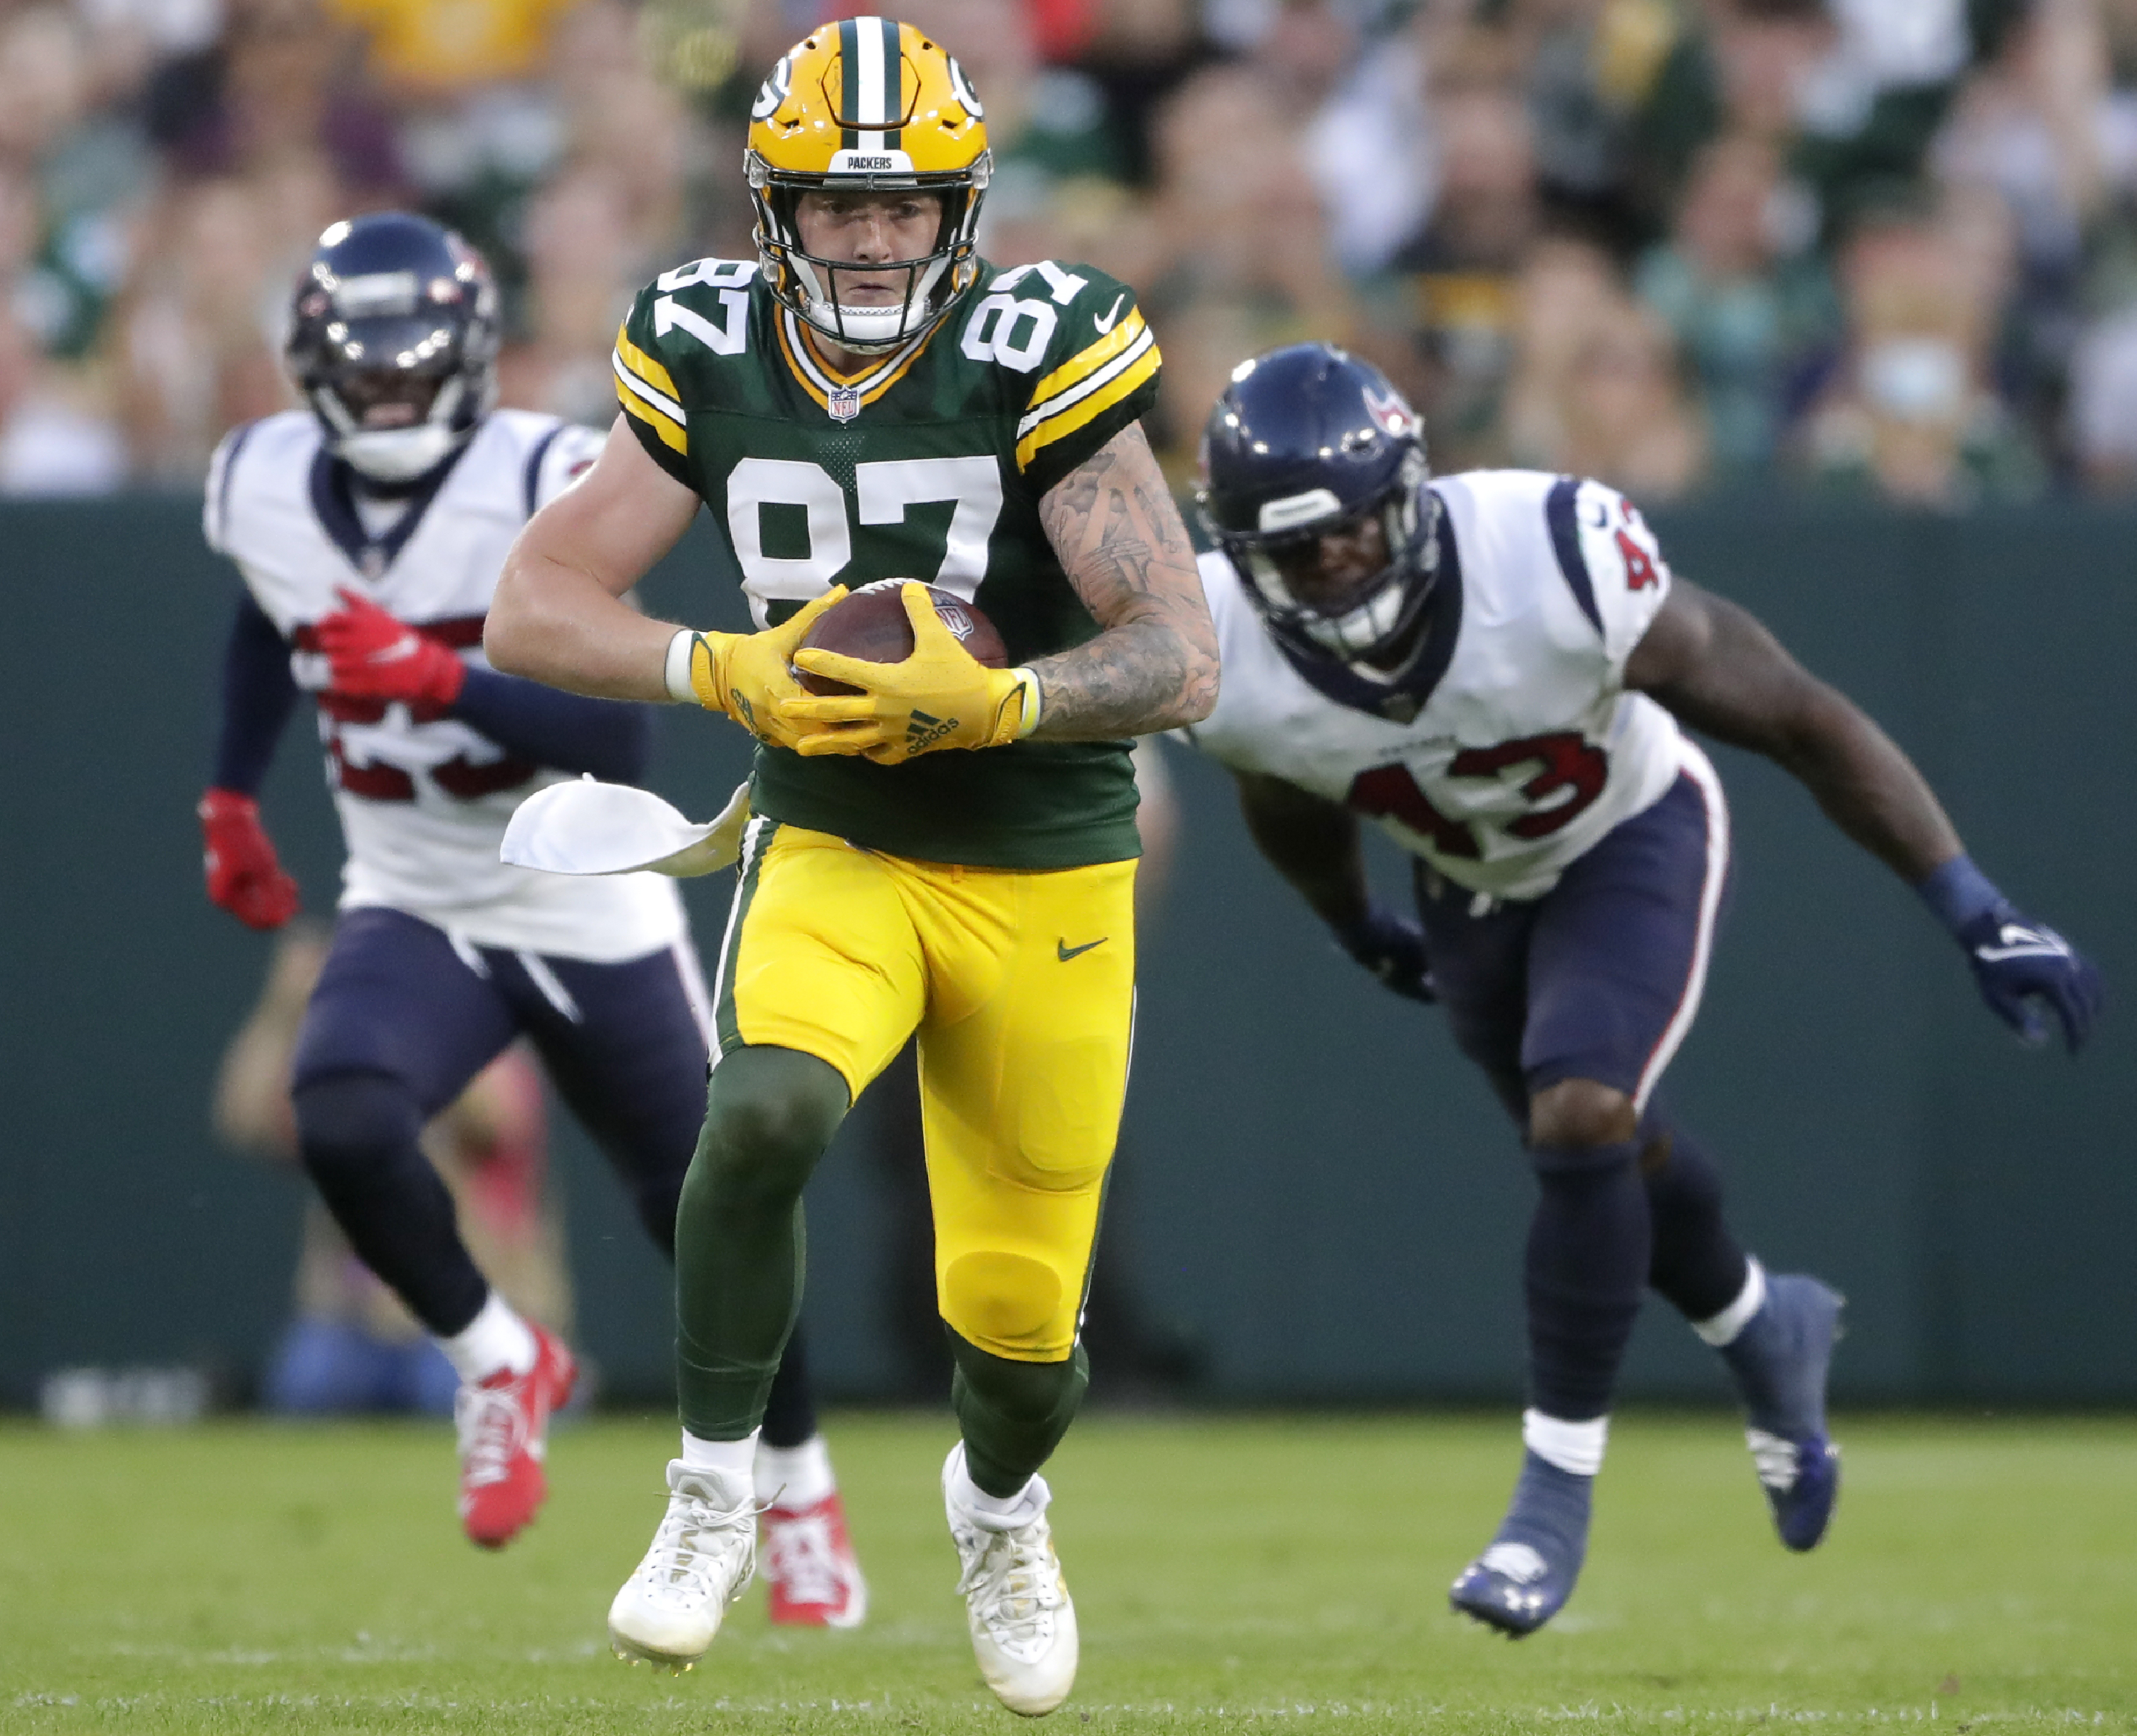 Aug 14, 2021; Green Bay, WI, USA; Green Bay Packers tight end Jace Sternberger (87) runs following a catch against the Houston Texans during their preseason football game on Saturday, August 14, 2021, at Lambeau Field in Green Bay, Wis. Mandatory Credit: William Glasheen-USA TODAY Sports